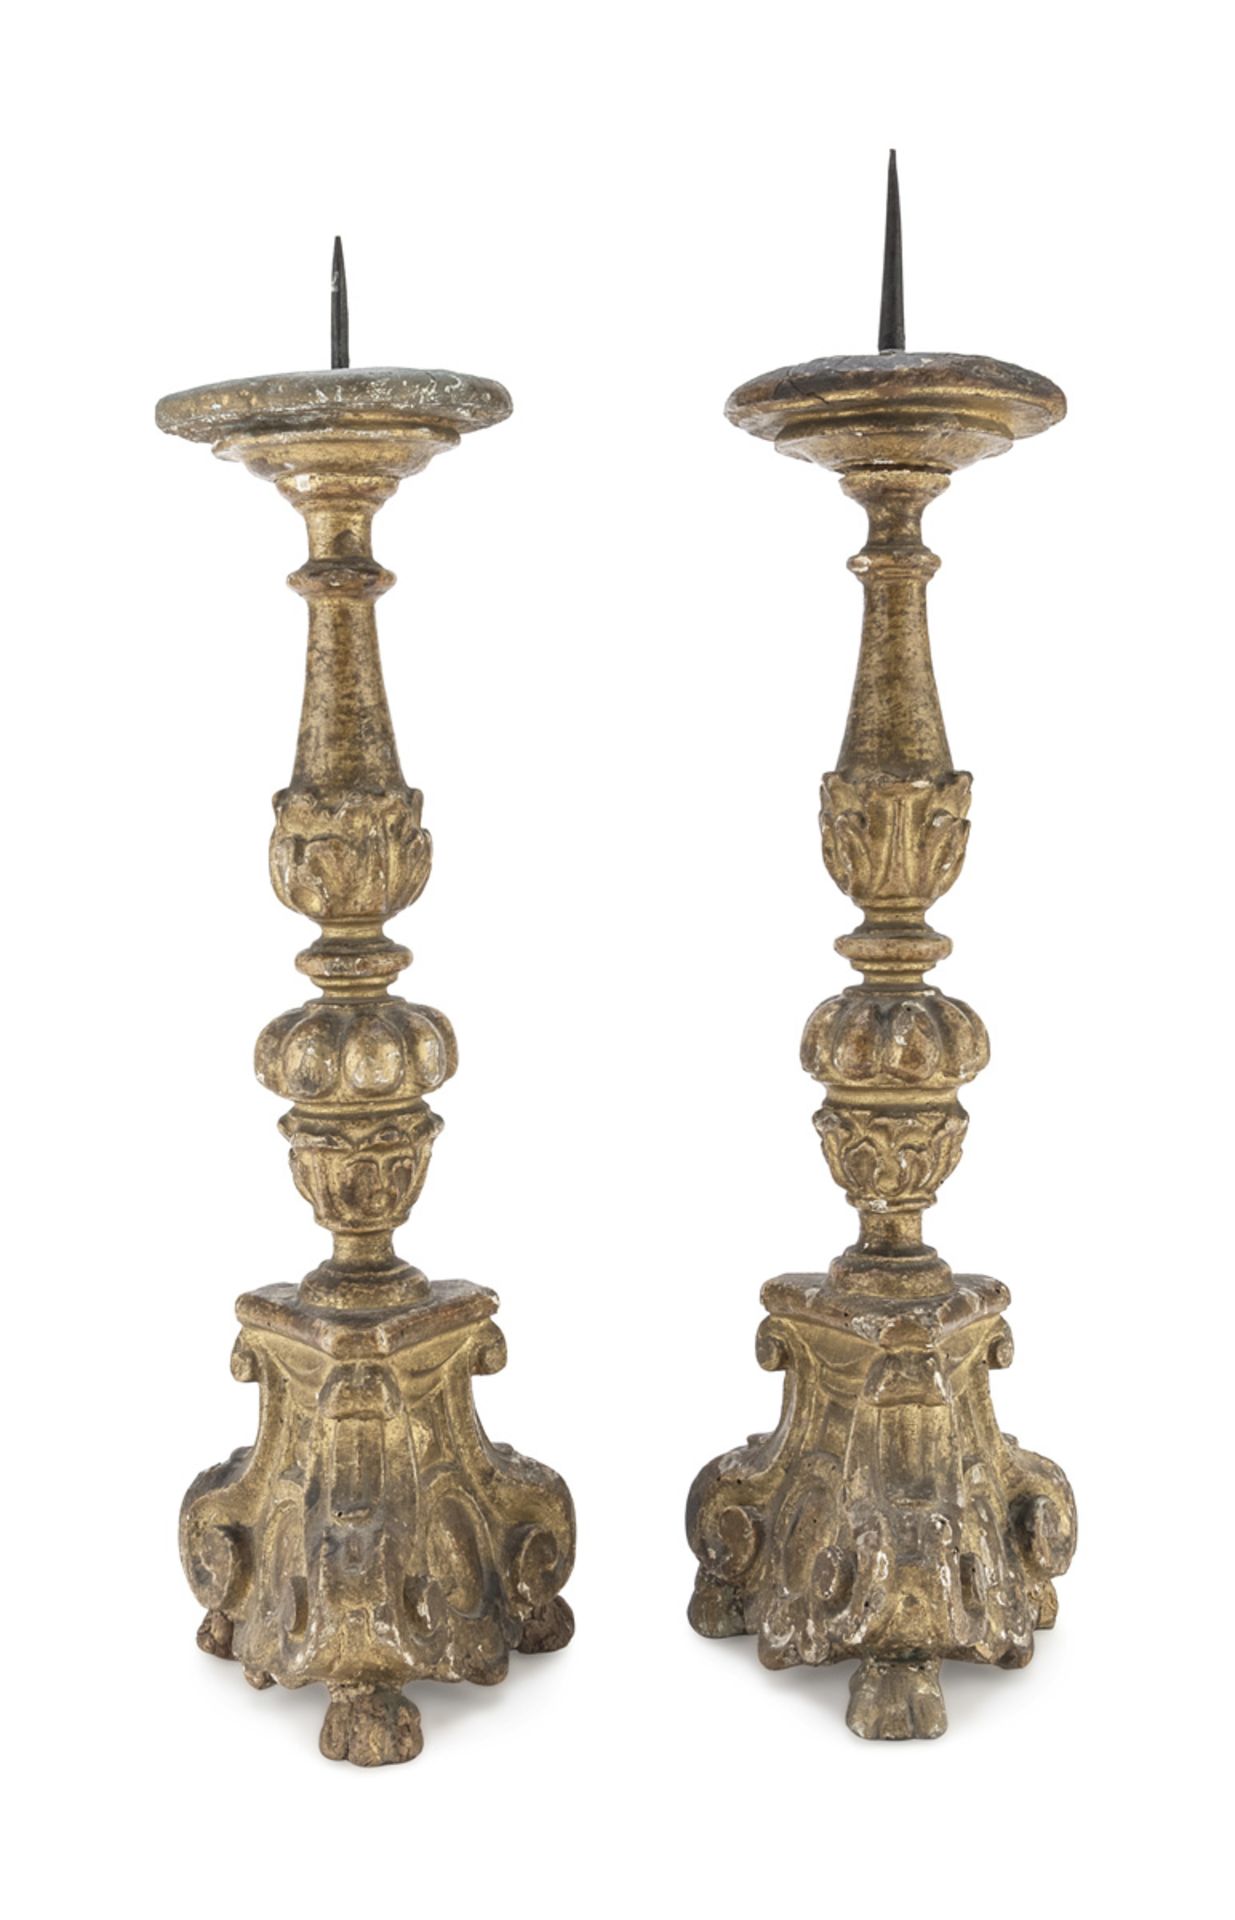 PAIR OF GILTWOOD CANDLESTICKS 18TH CENTURY